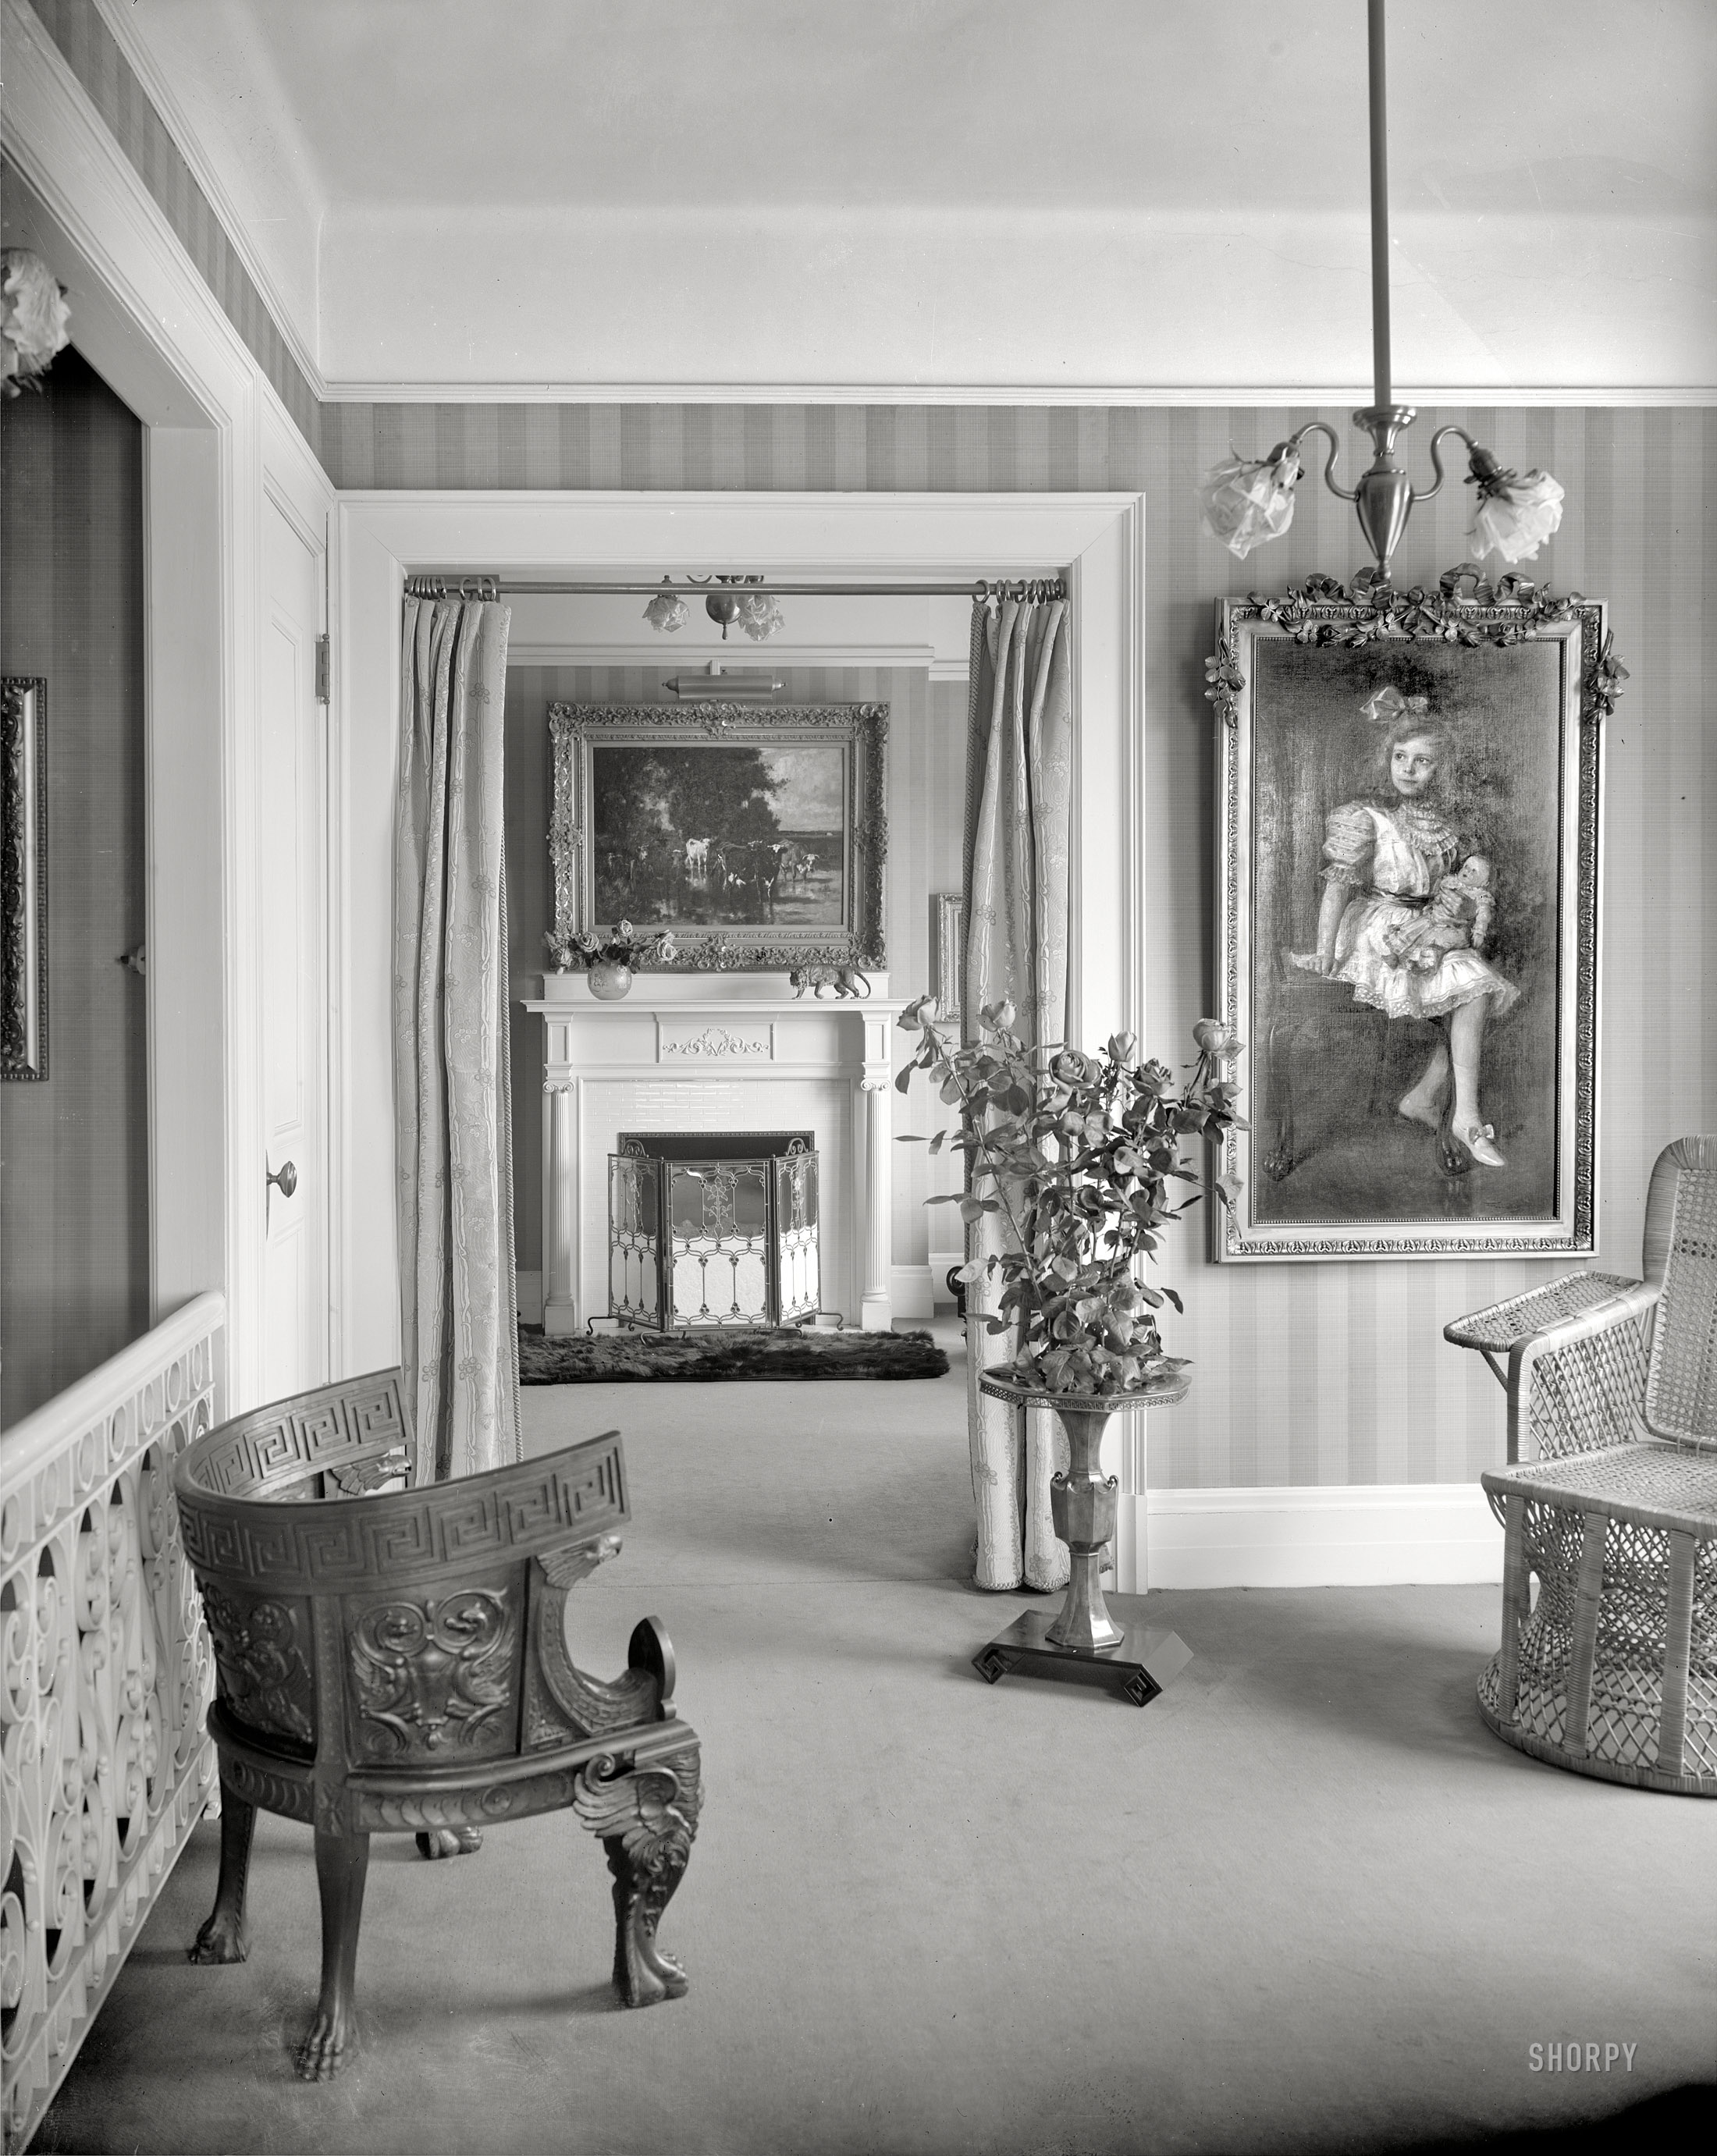 Circa 1915. "Room with painting of child, roses, and portiere." A room with a view, or possibly a narrative. Detroit Publishing Co. glass negative. View full size.